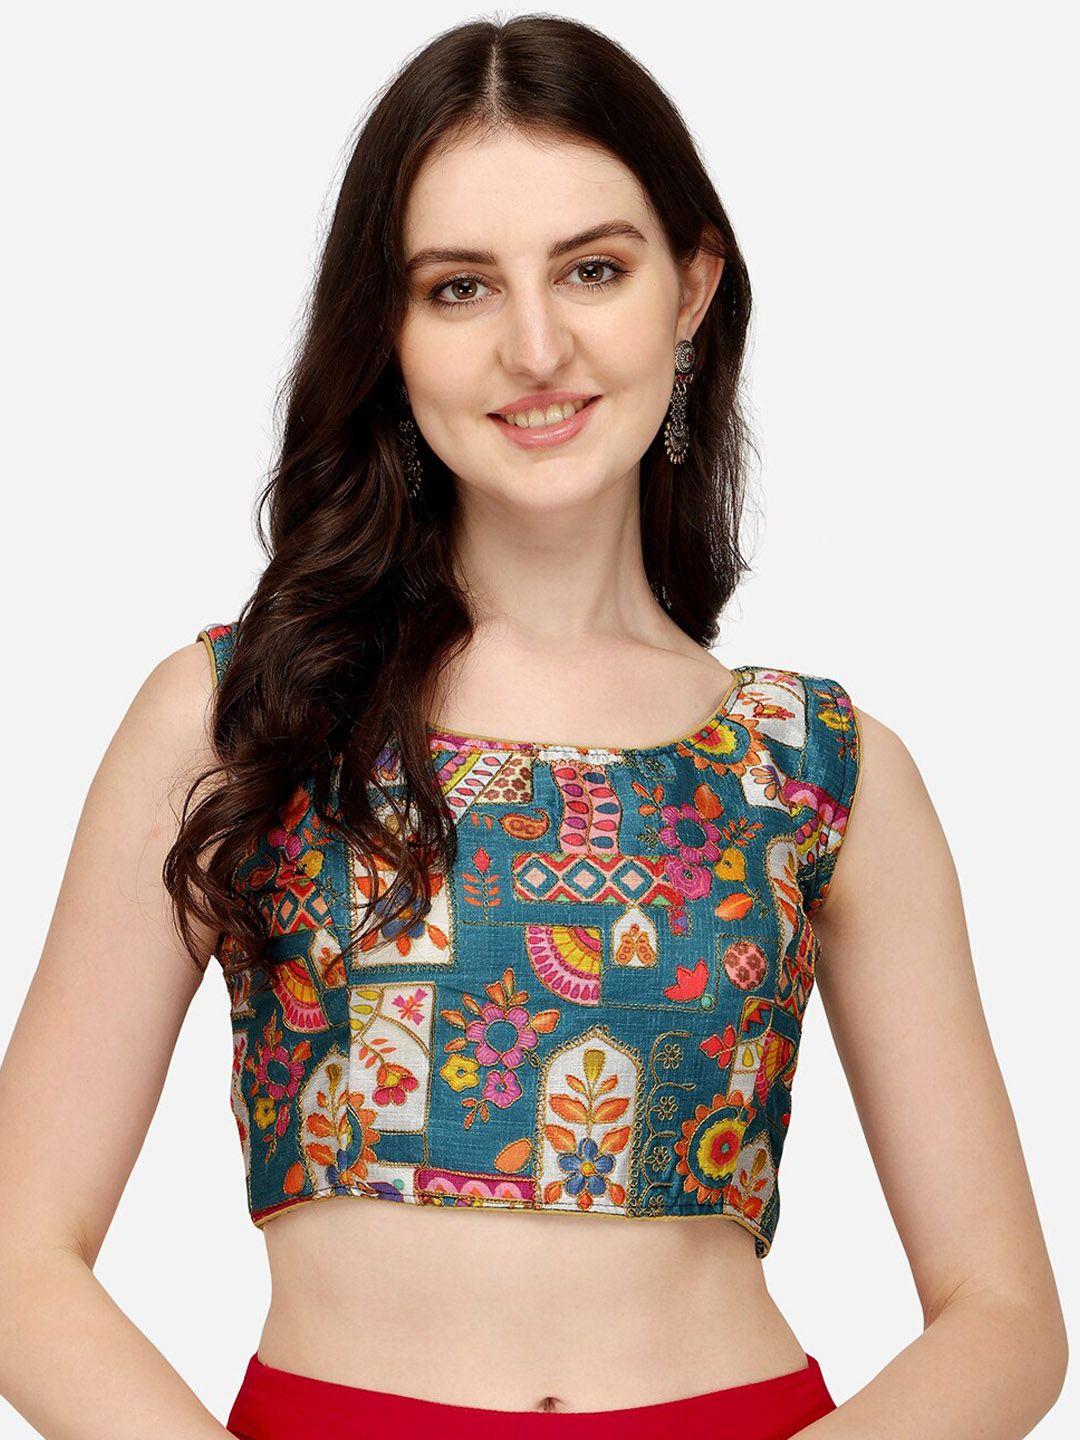 sumaira-tex-women-turquoise-blue-digital-printed-embroidered-saree-blouse